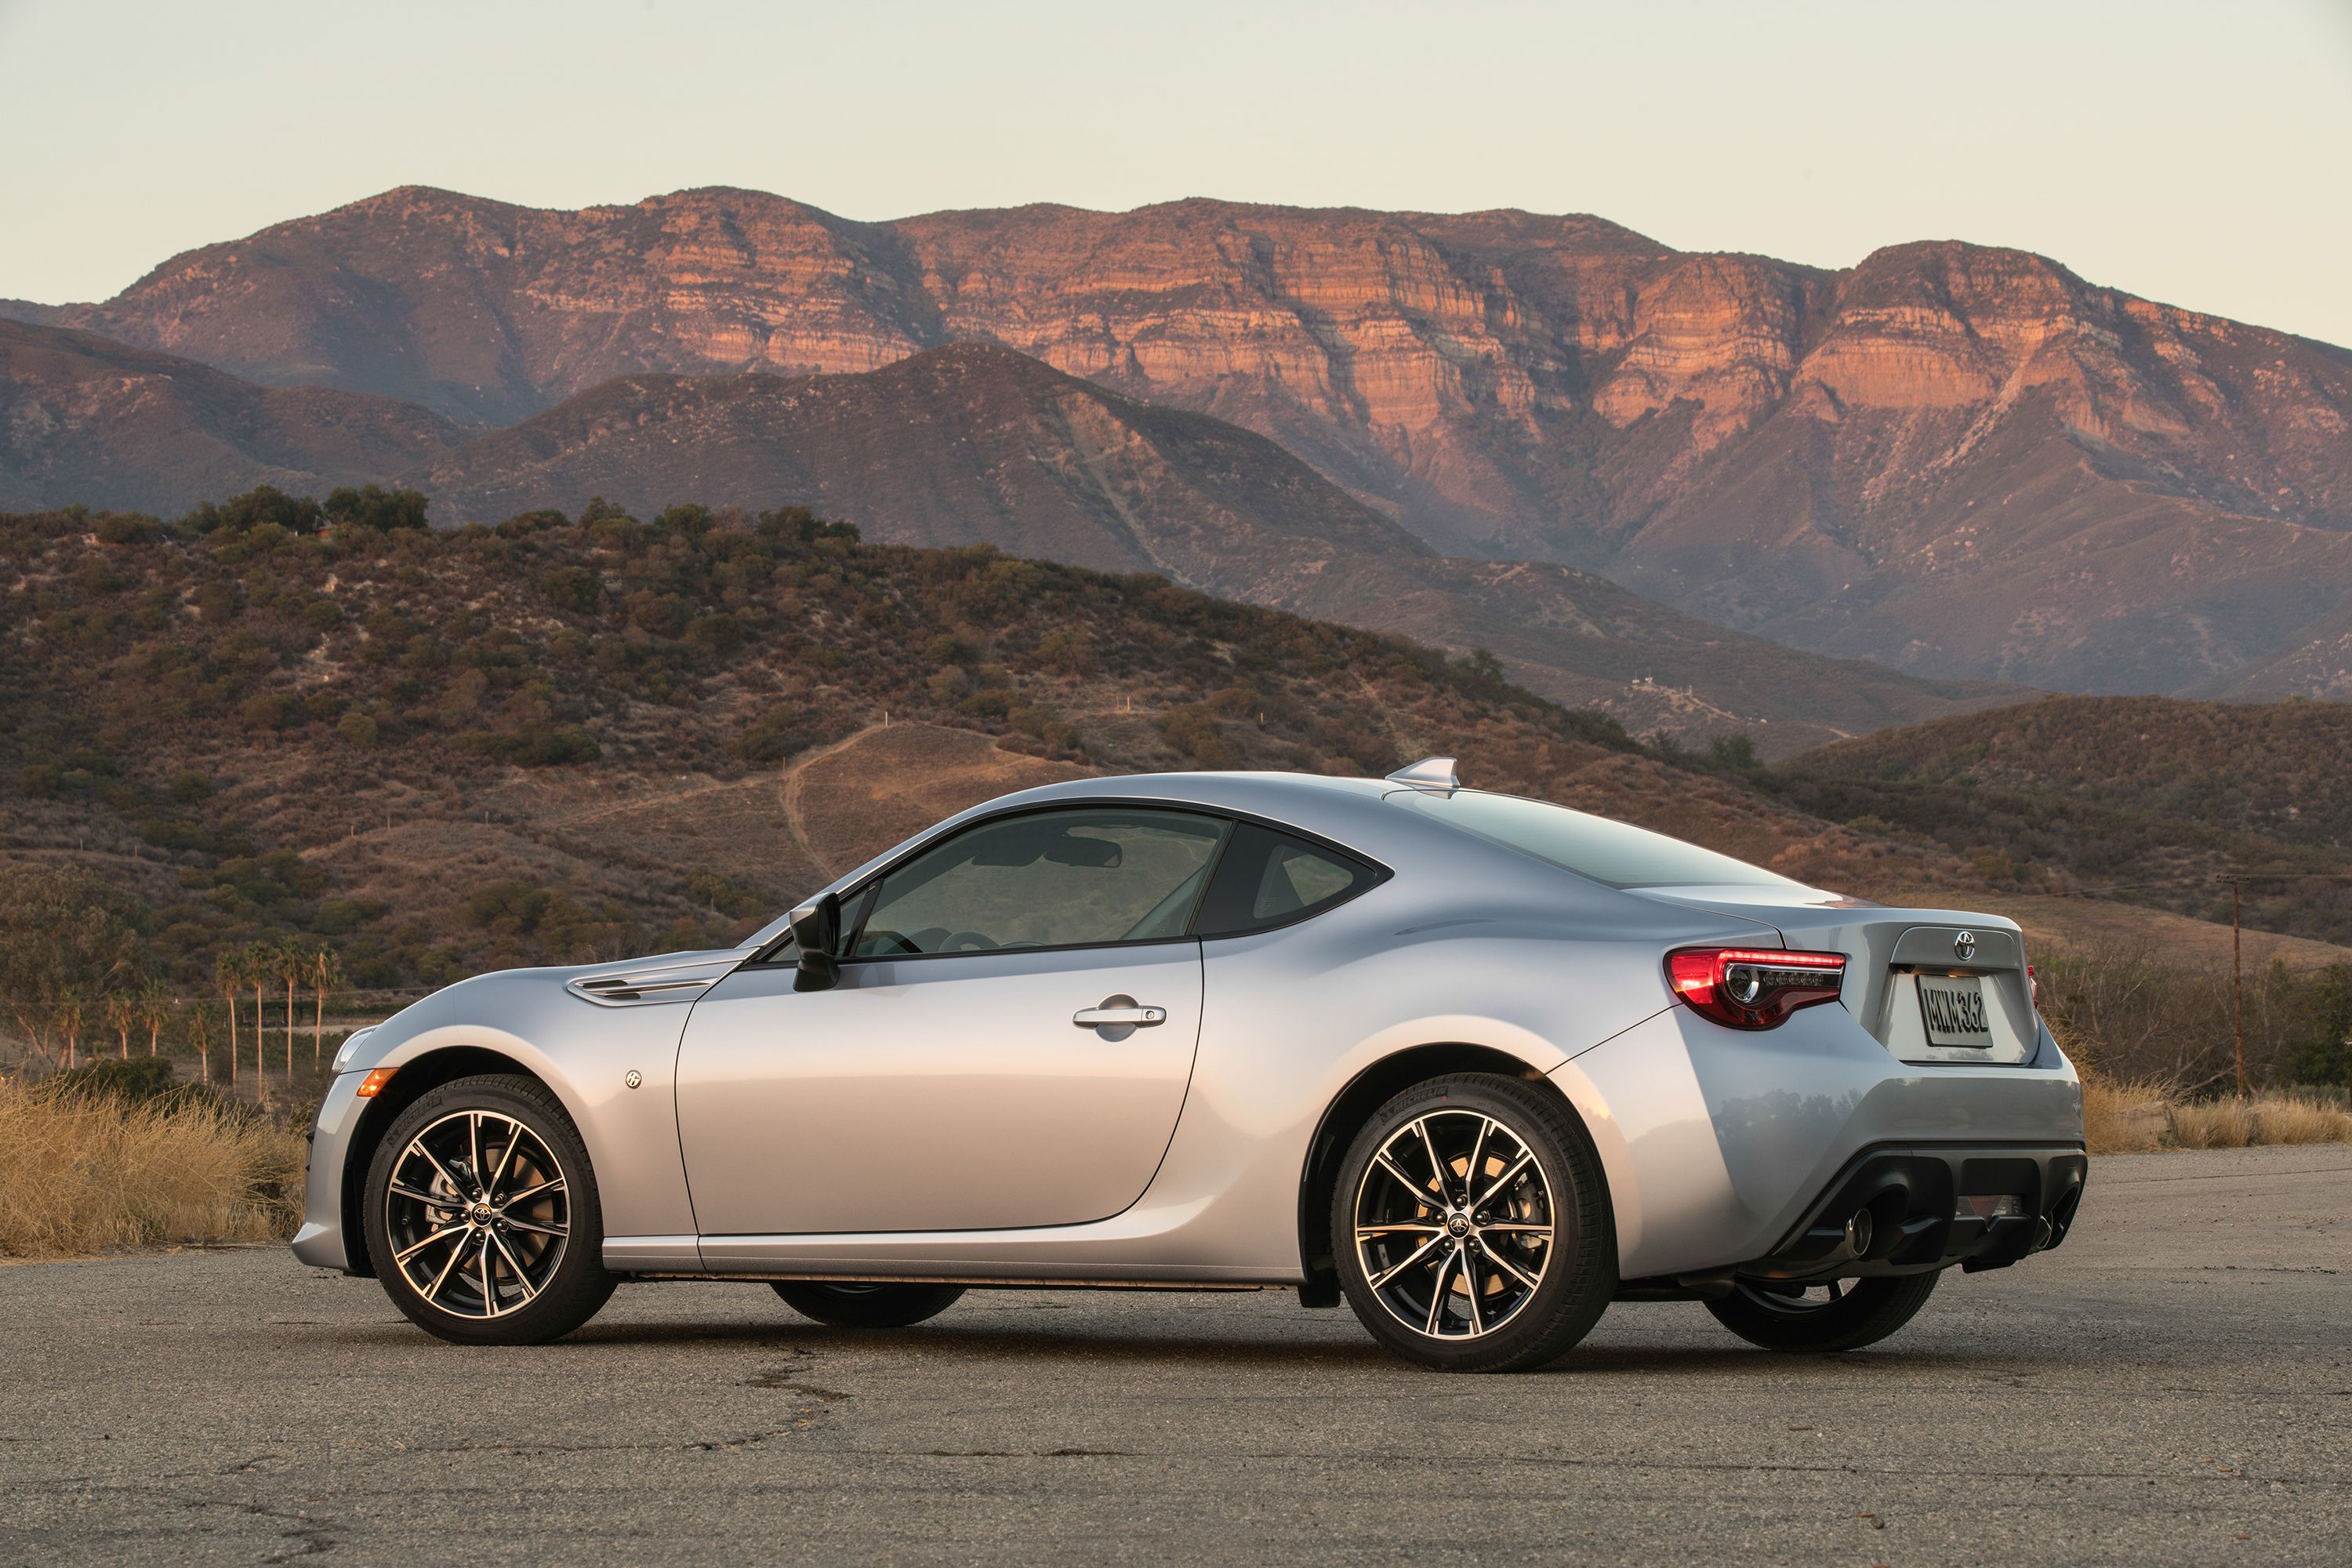 2017 Toyota 86 – Driving Impression And Review